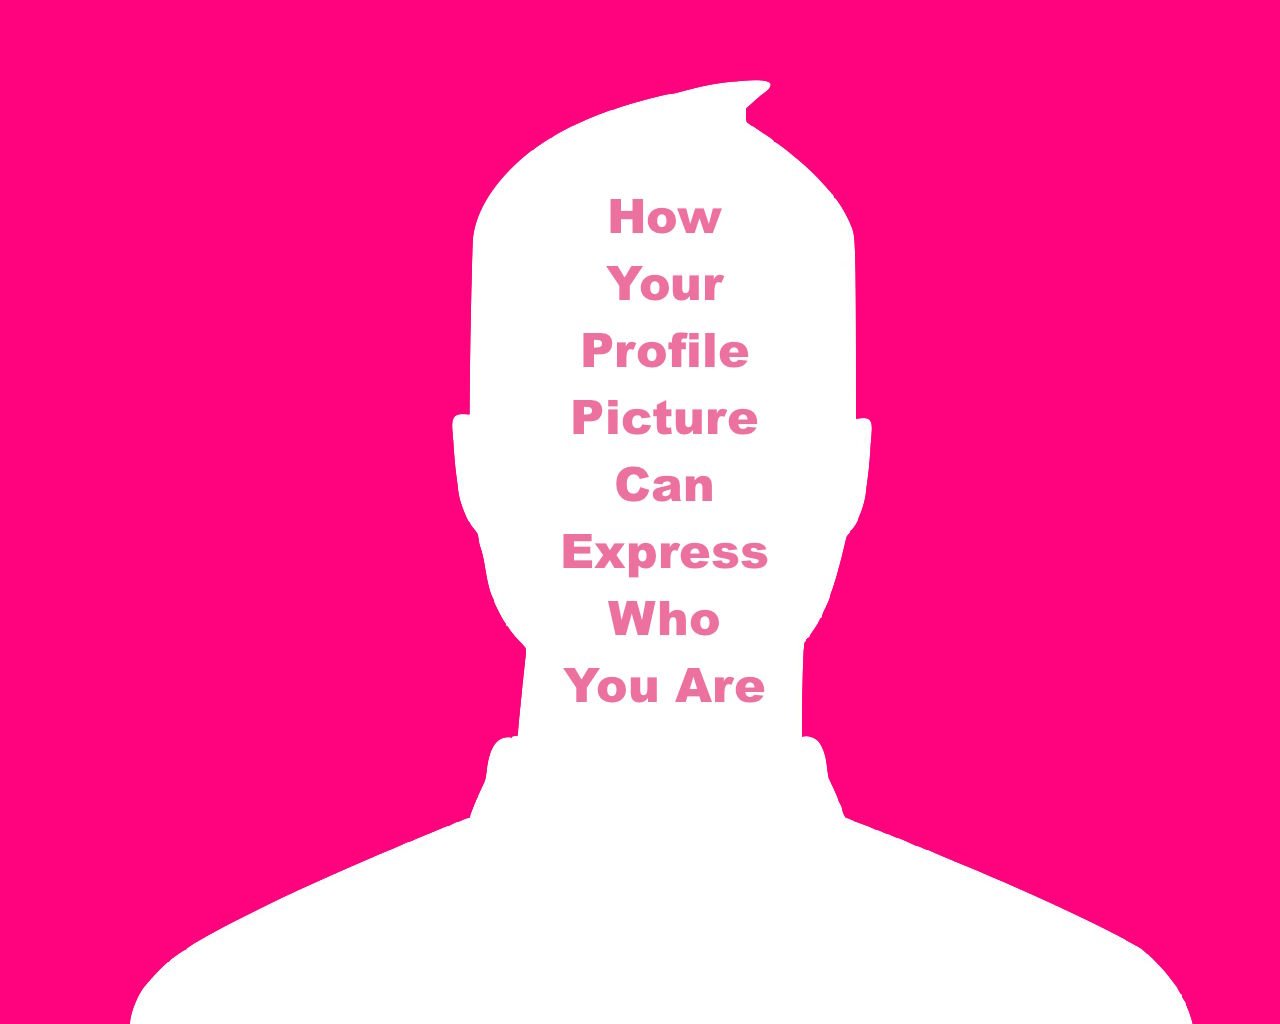 How Your Profile Picture Can Express Who You Are